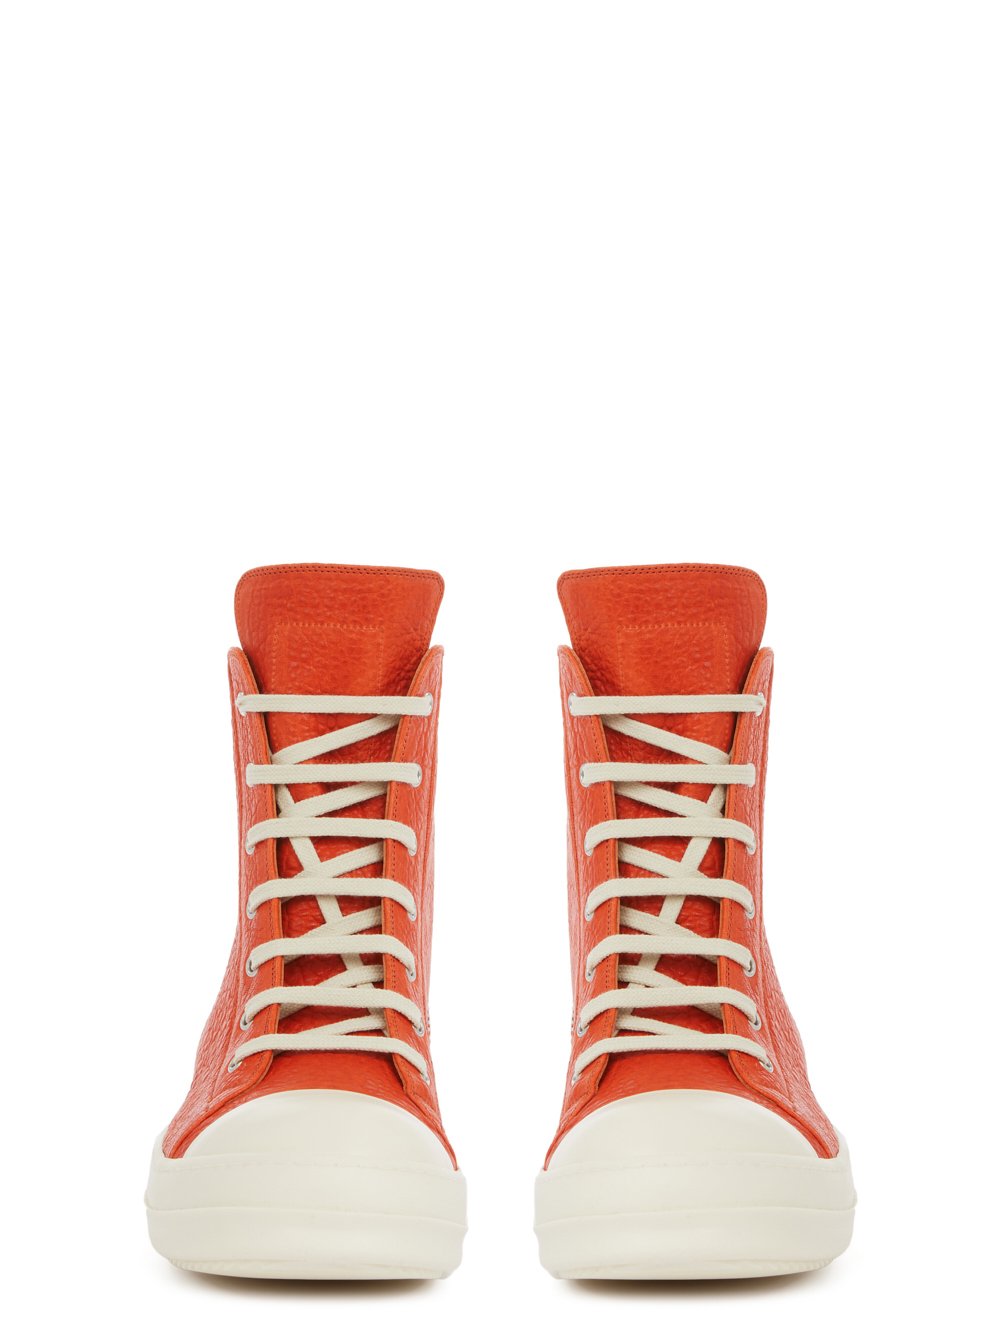 Rick Owens RICK OWENS FW22 STROBE SNEAKERS IN ORANGE AND MILK BUBBLE LAMB LEAHTER